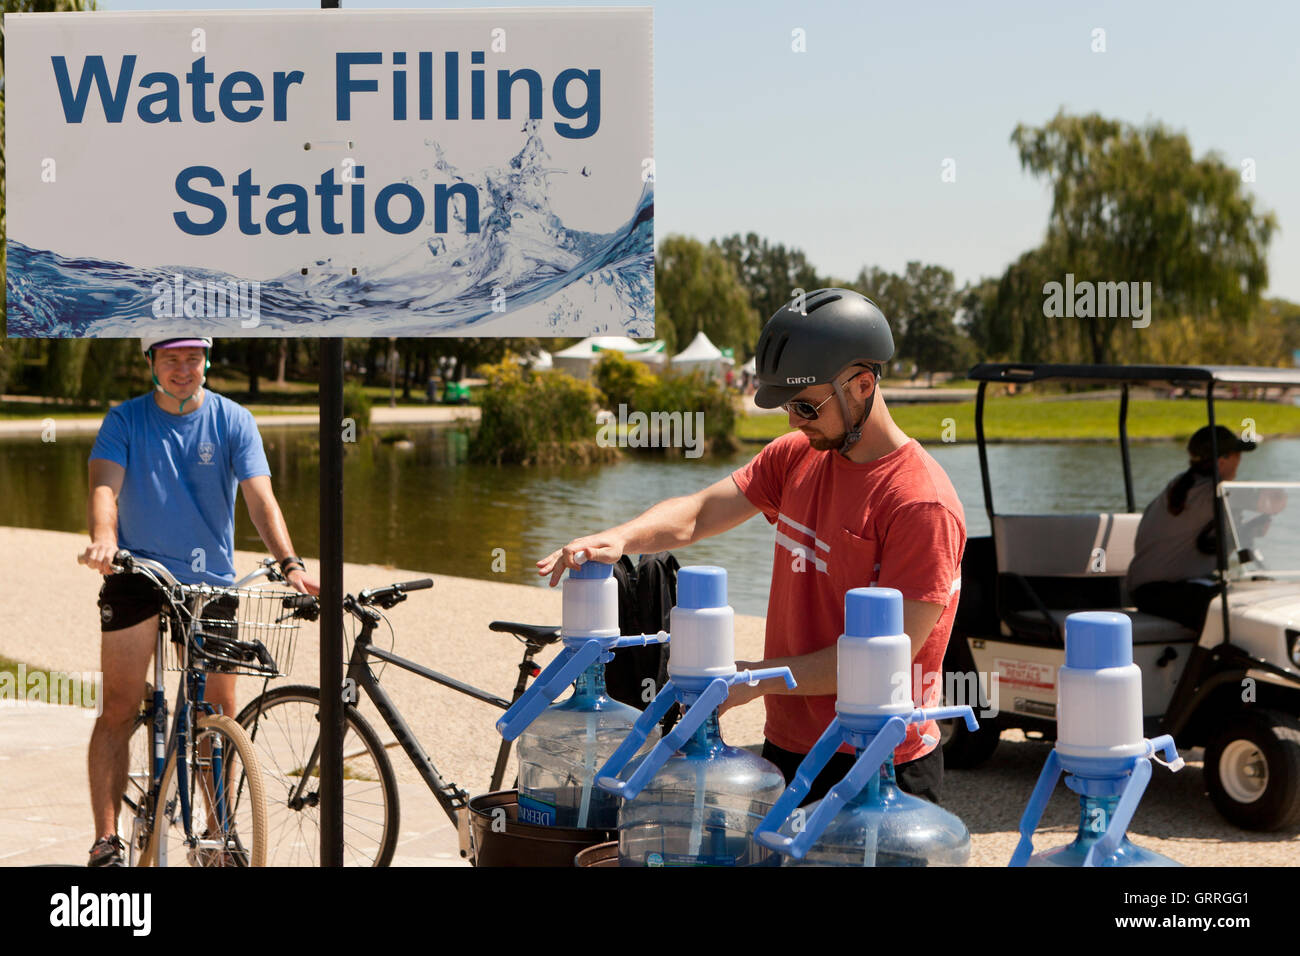 Water filling station at an outdoor event - Washington, DC USA Stock Photo